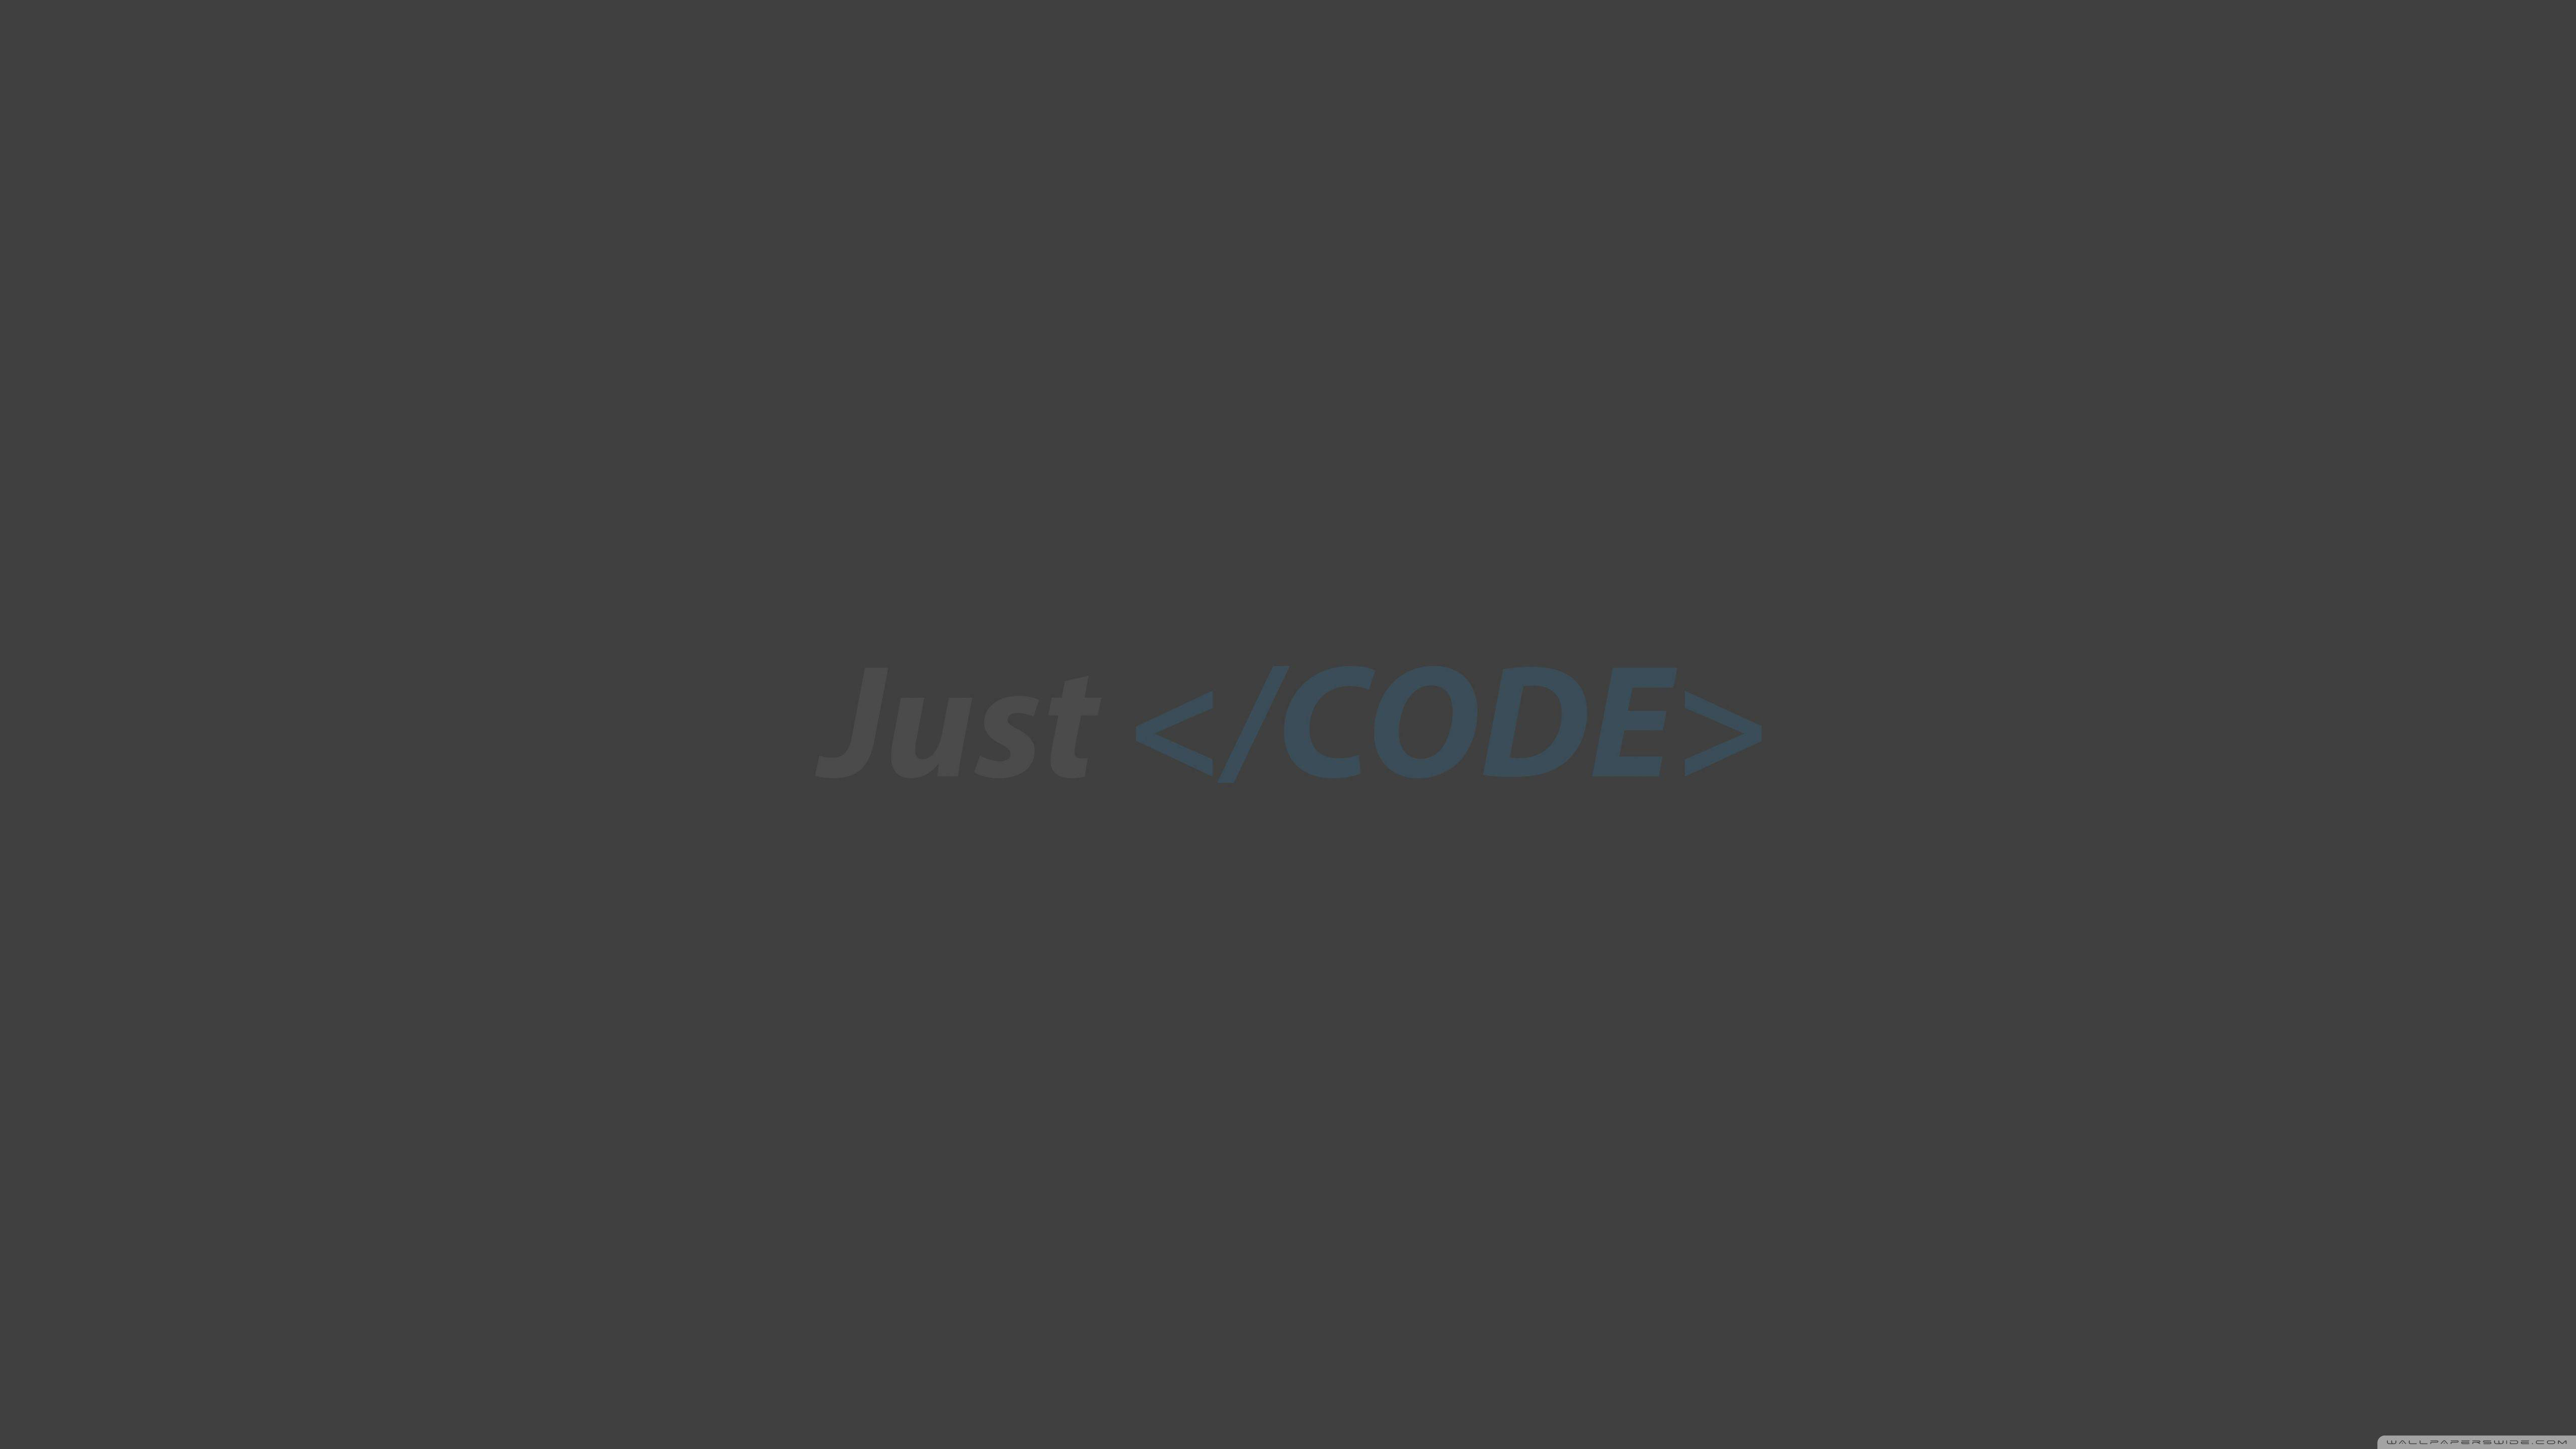 Coding Wallpaper, Just Code, Code, Other